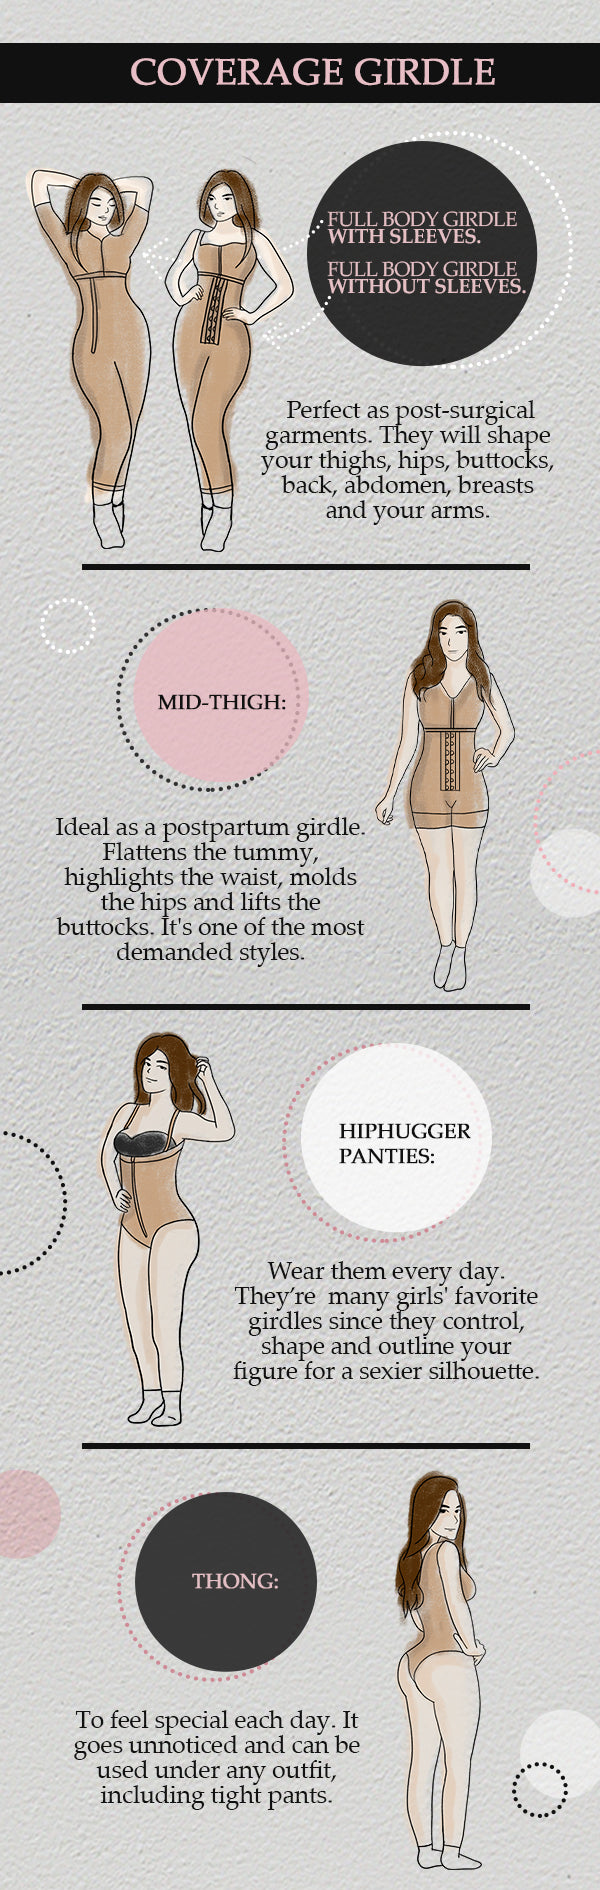 6 Types of Colombian Shapewear for Independent Women – Shapes Secrets Fajas